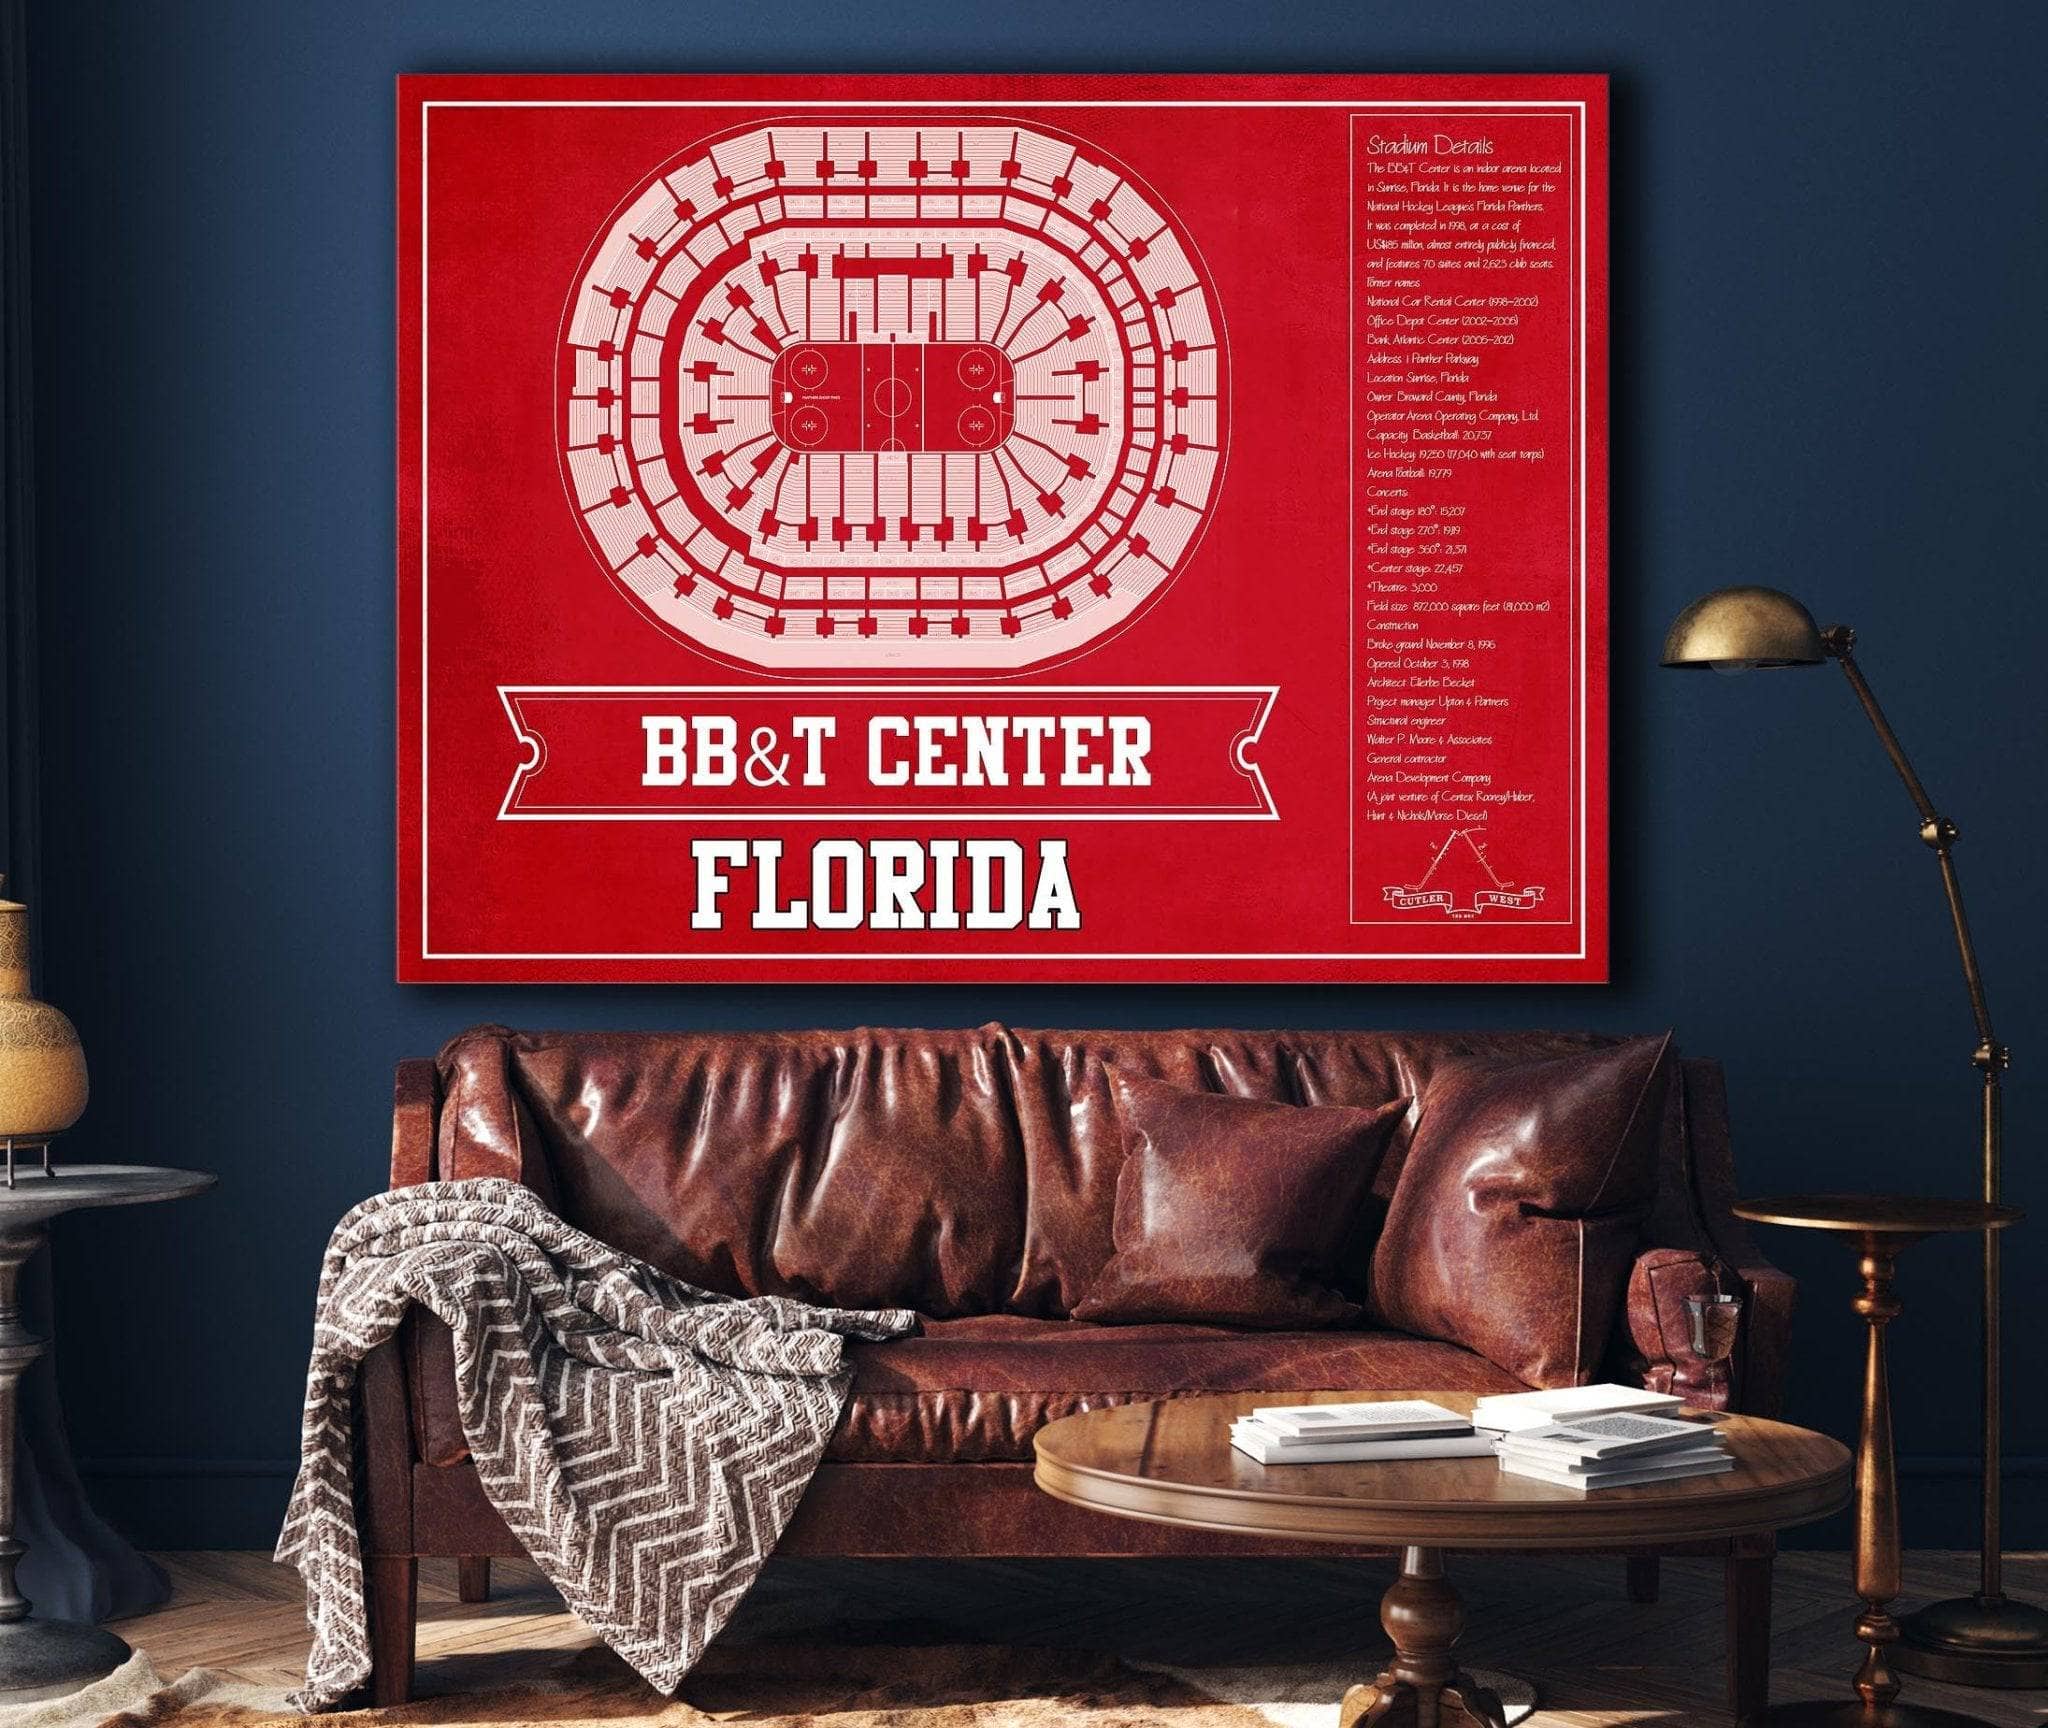 Florida Panthers BB&T Center Seating Chart - Vintage Hockey Team Color Print